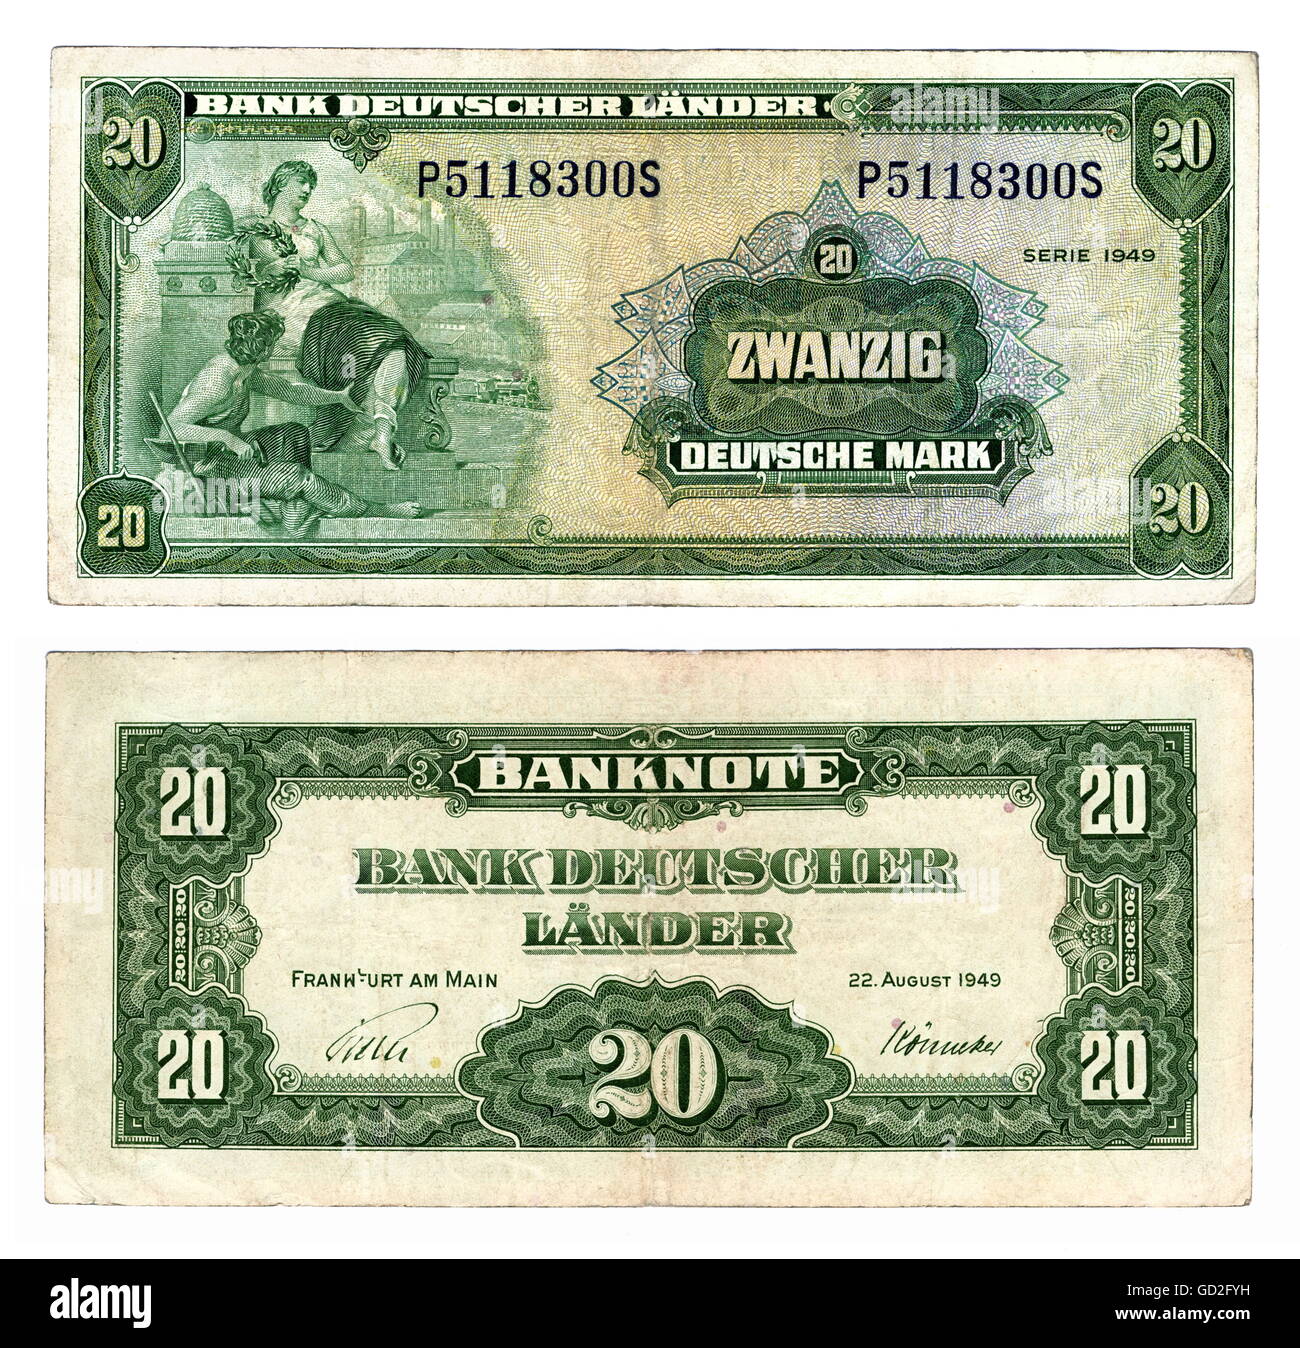 money / finances,banknote,first 20-Mark banknote,obverse and reverse side,during of the currency reform on 21.6.1948,in the western zones,was furthermore valid in the new founded federal republic,Germany,1949,20,DM,Deutschmark,German Mark,deutsche mark,deutschemark,deutschmark,twenty,mark,bank of German countries,forerunner of the German Central Bank,currency reform,currency reforms,post war money,economy,economic history,economic miracle,economic miracles,banknotes,allegoric illustration,allegory,steel engraving,steel engravings,,Additional-Rights-Clearences-Not Available Stock Photo